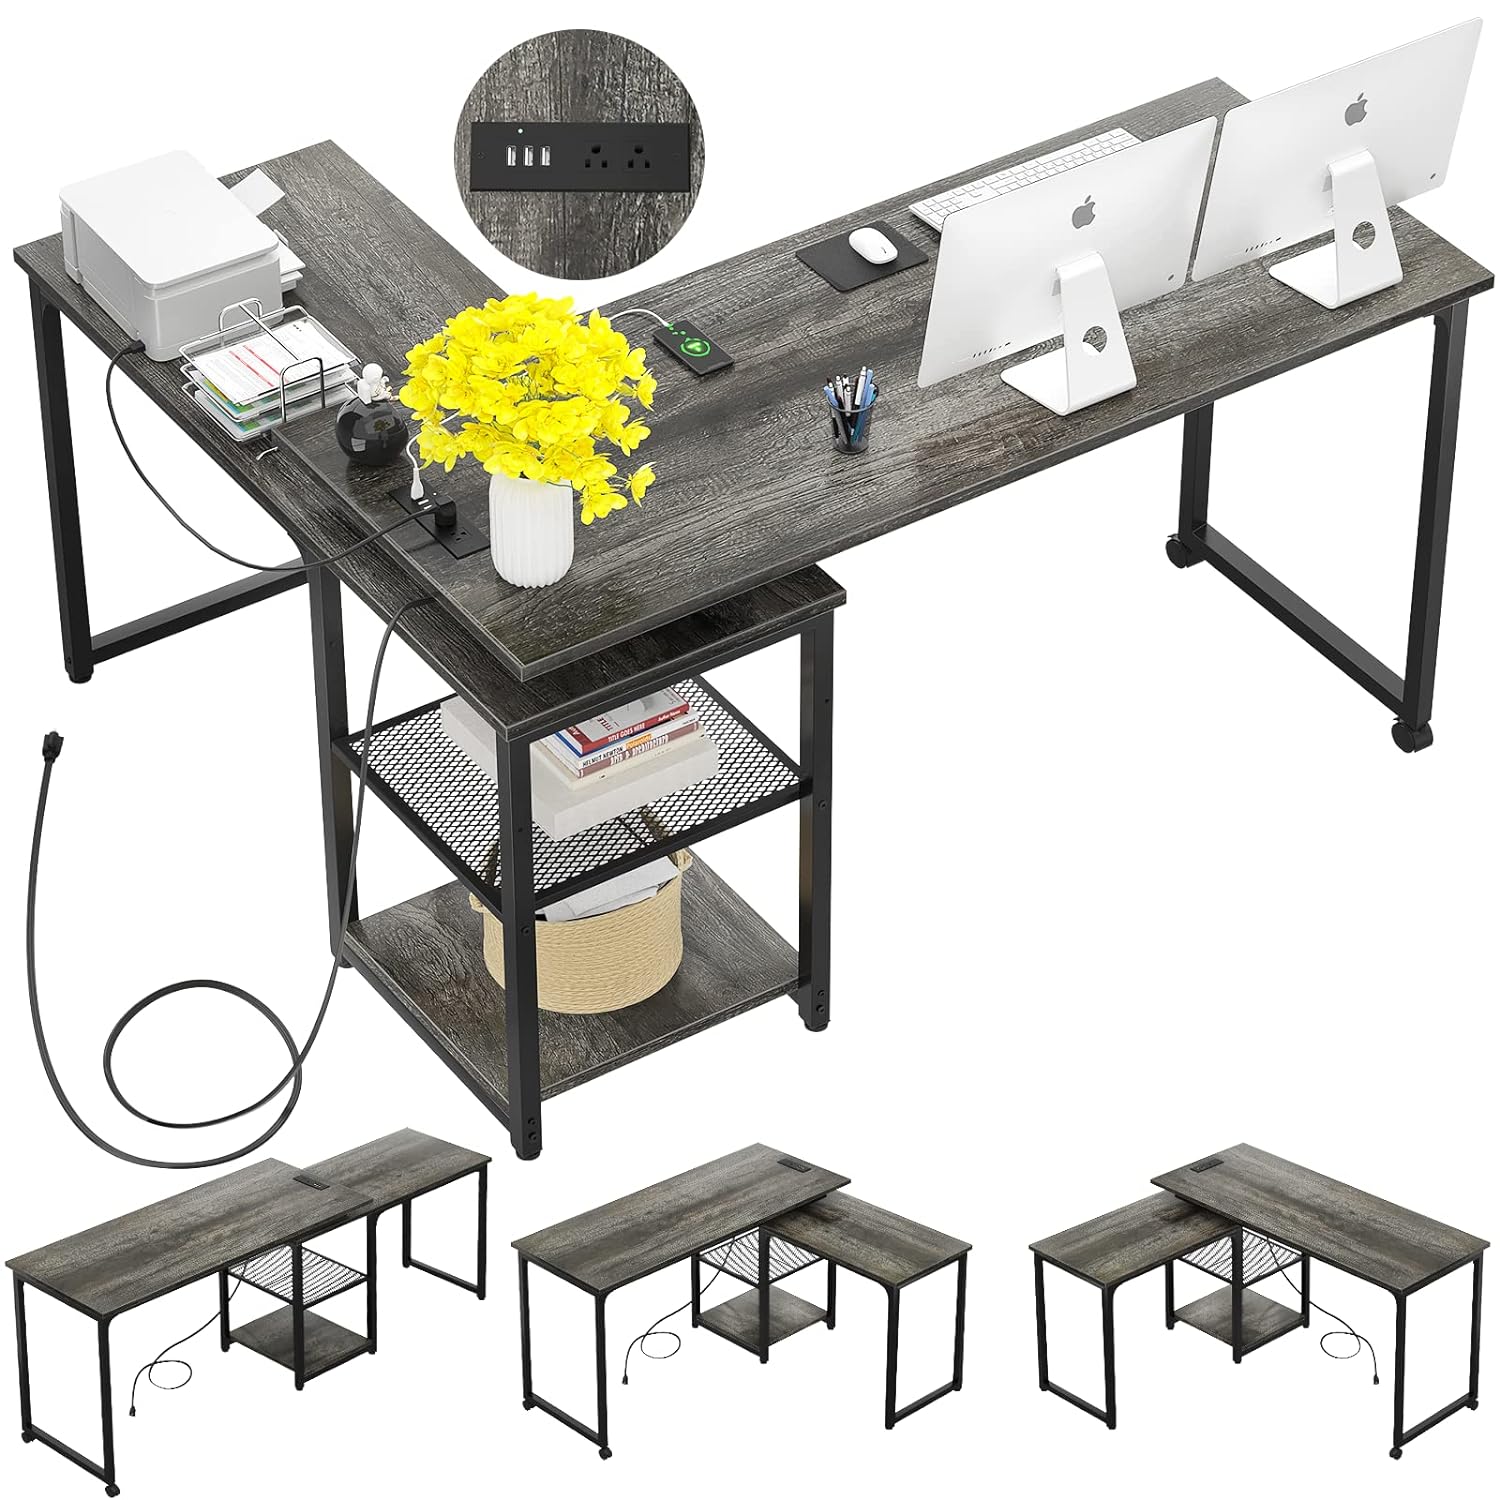 TKM Home L Shaped Desk With Outlets And Usb Ports, 360° Rotating L-Shaped Desk, 71 Inch Reversible Computer Desk With Adjusta?